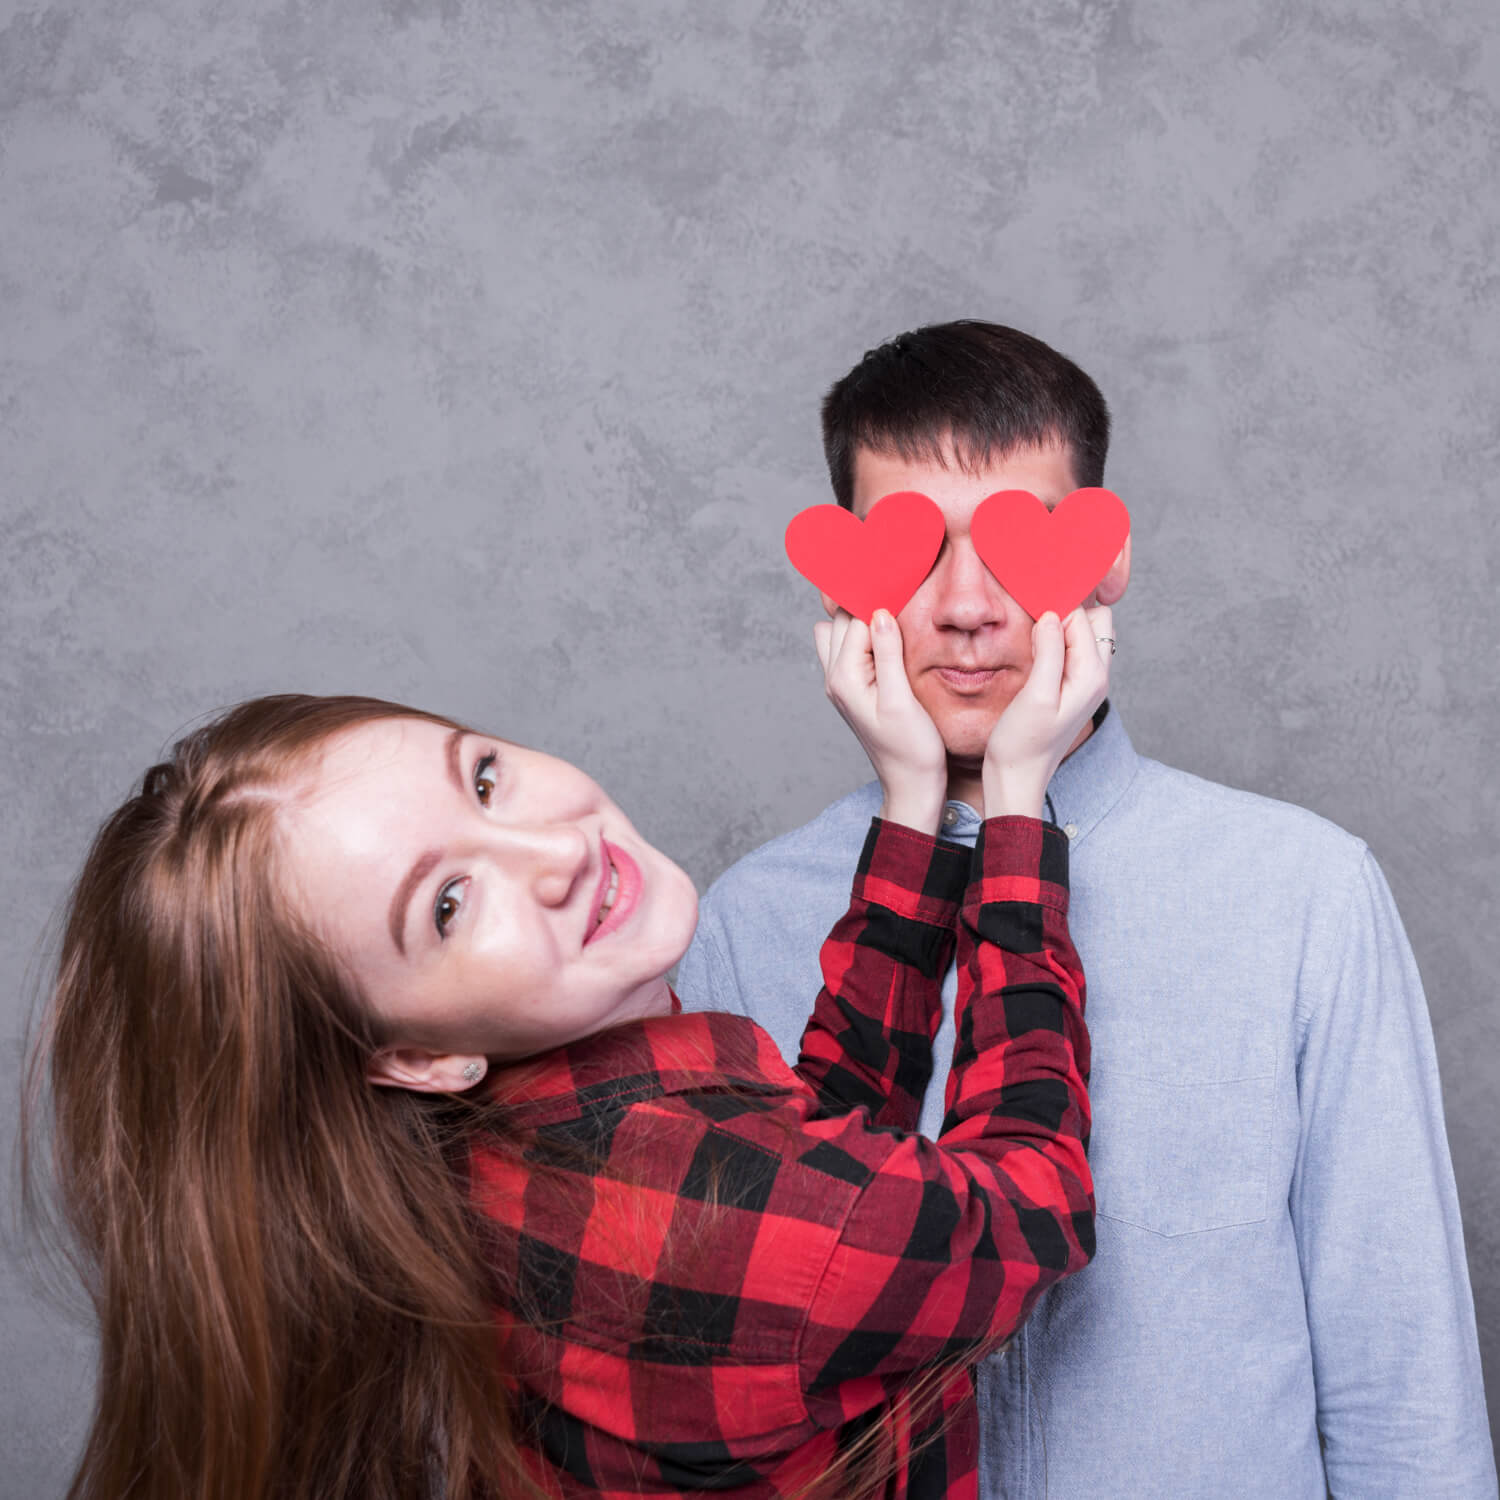 woman smiling covering man eyes with paper hearts